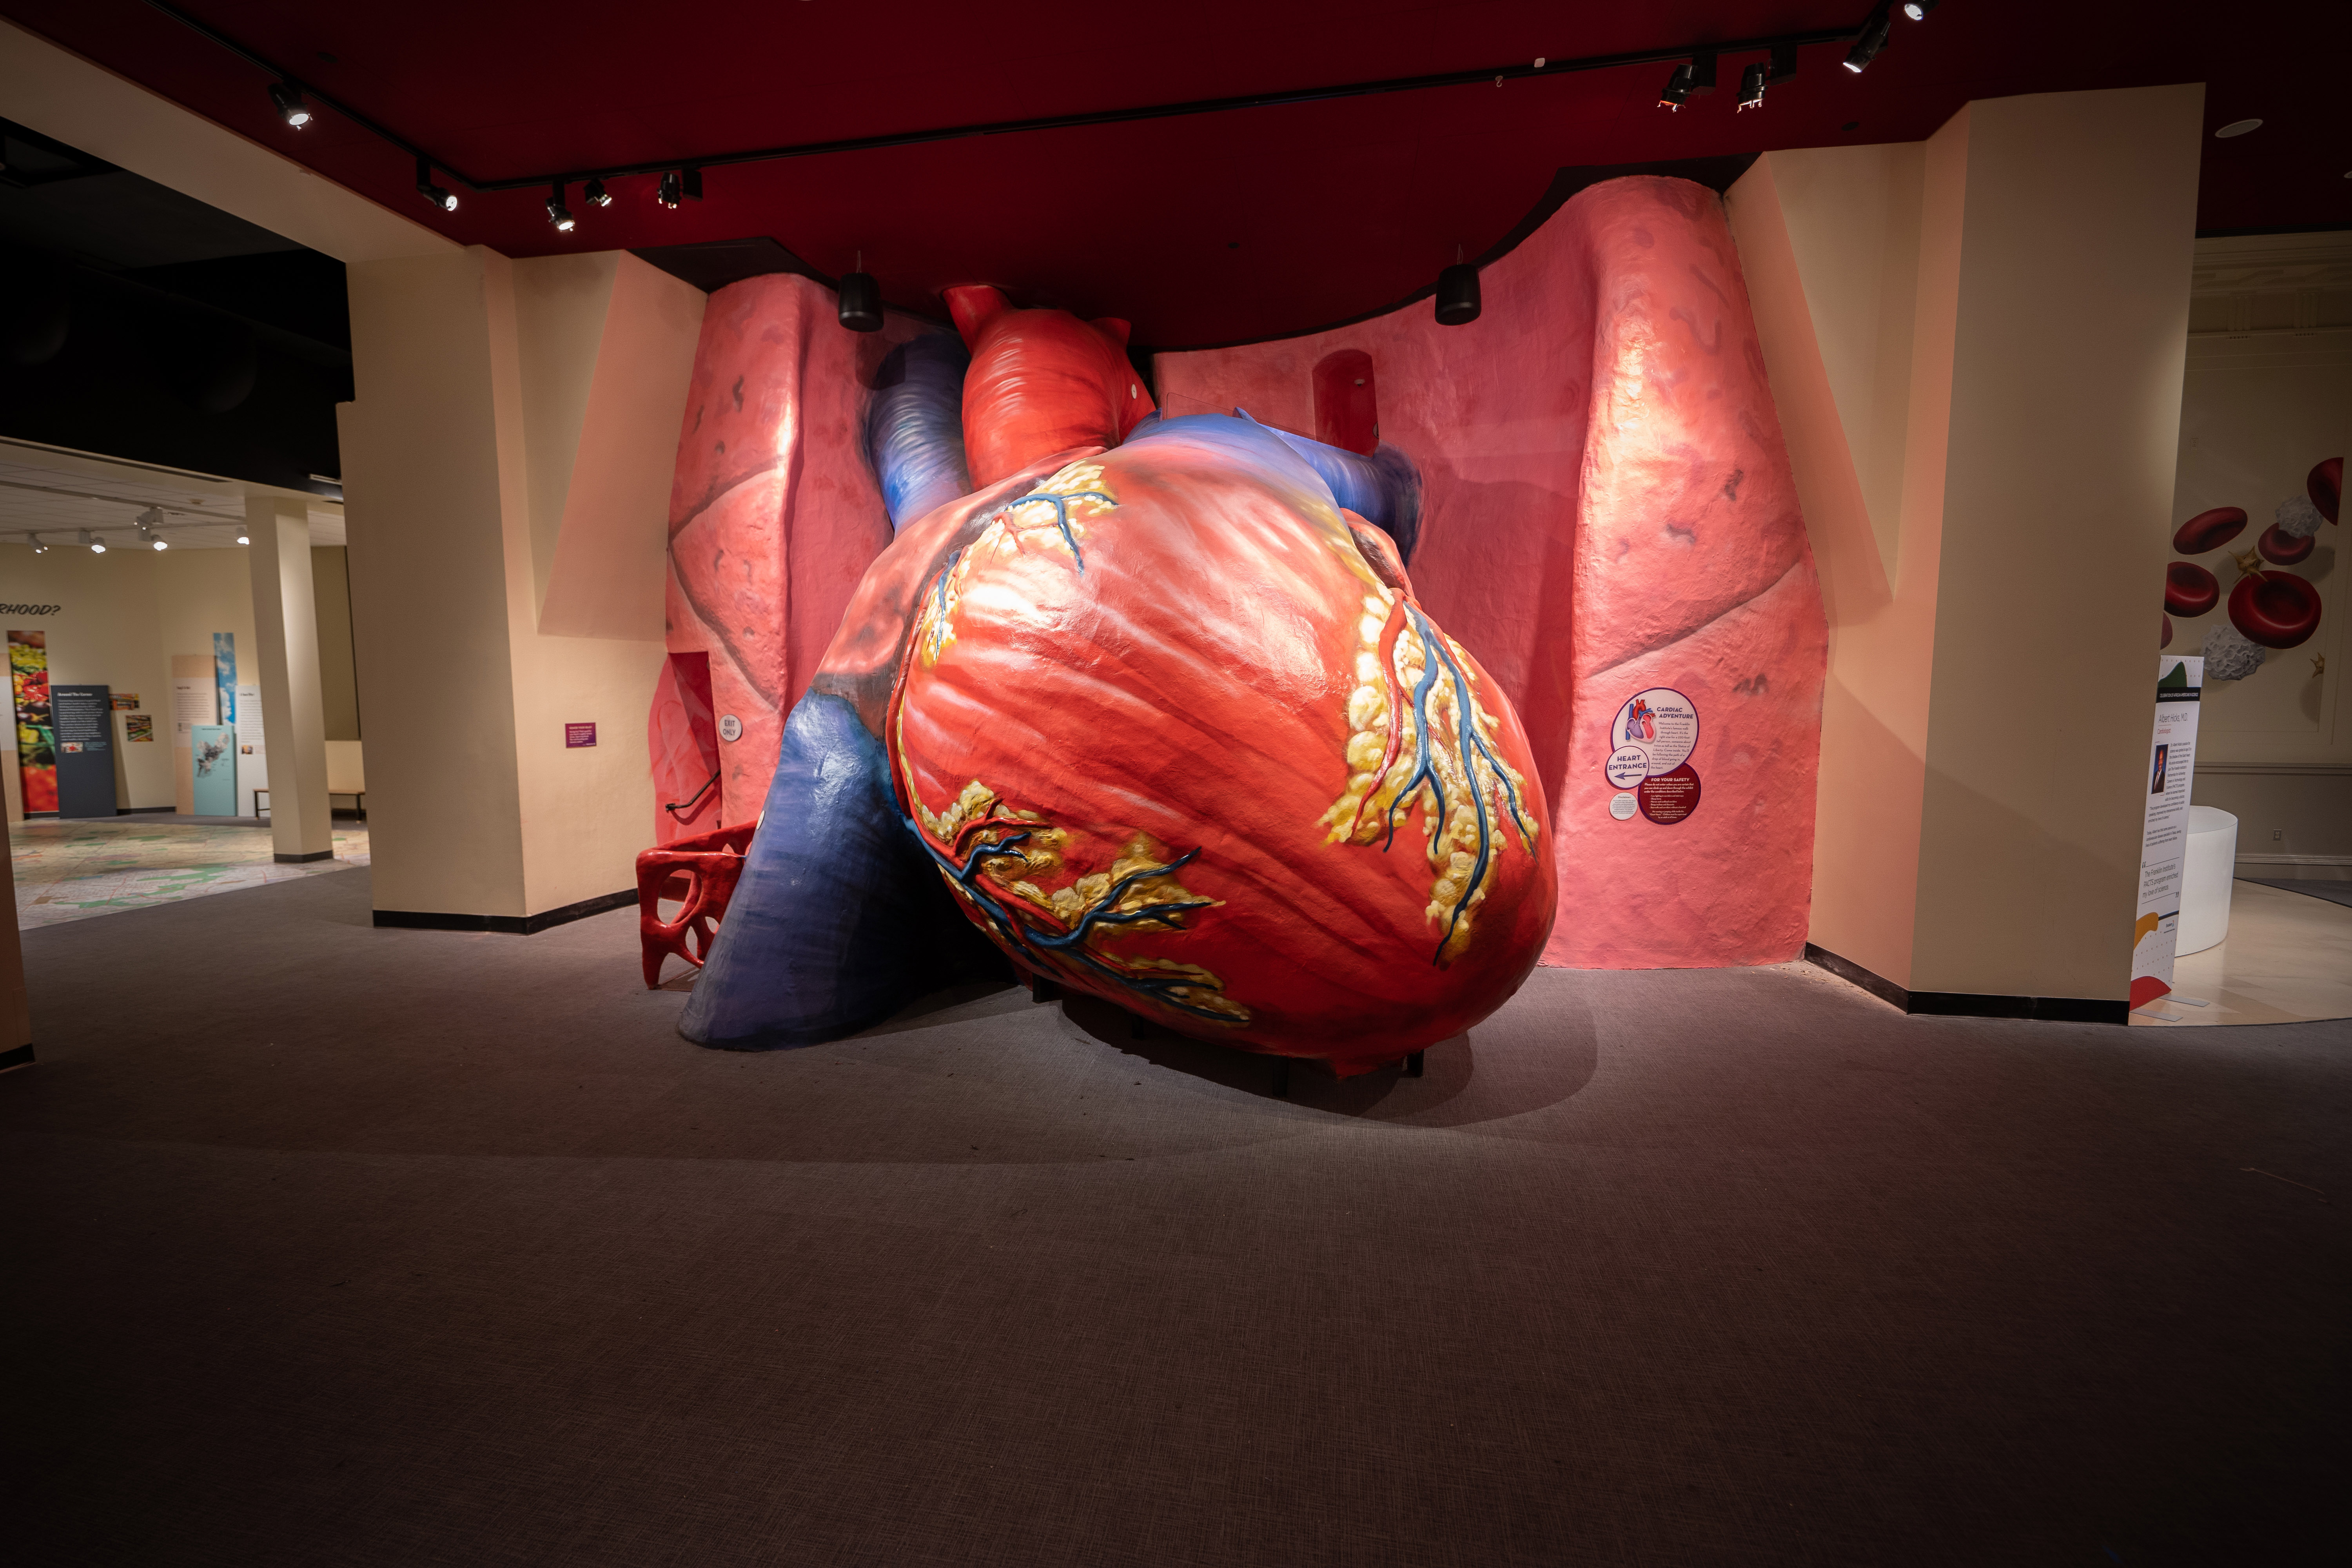 Franklin Institute's Iconic Giant Heart Exhibition